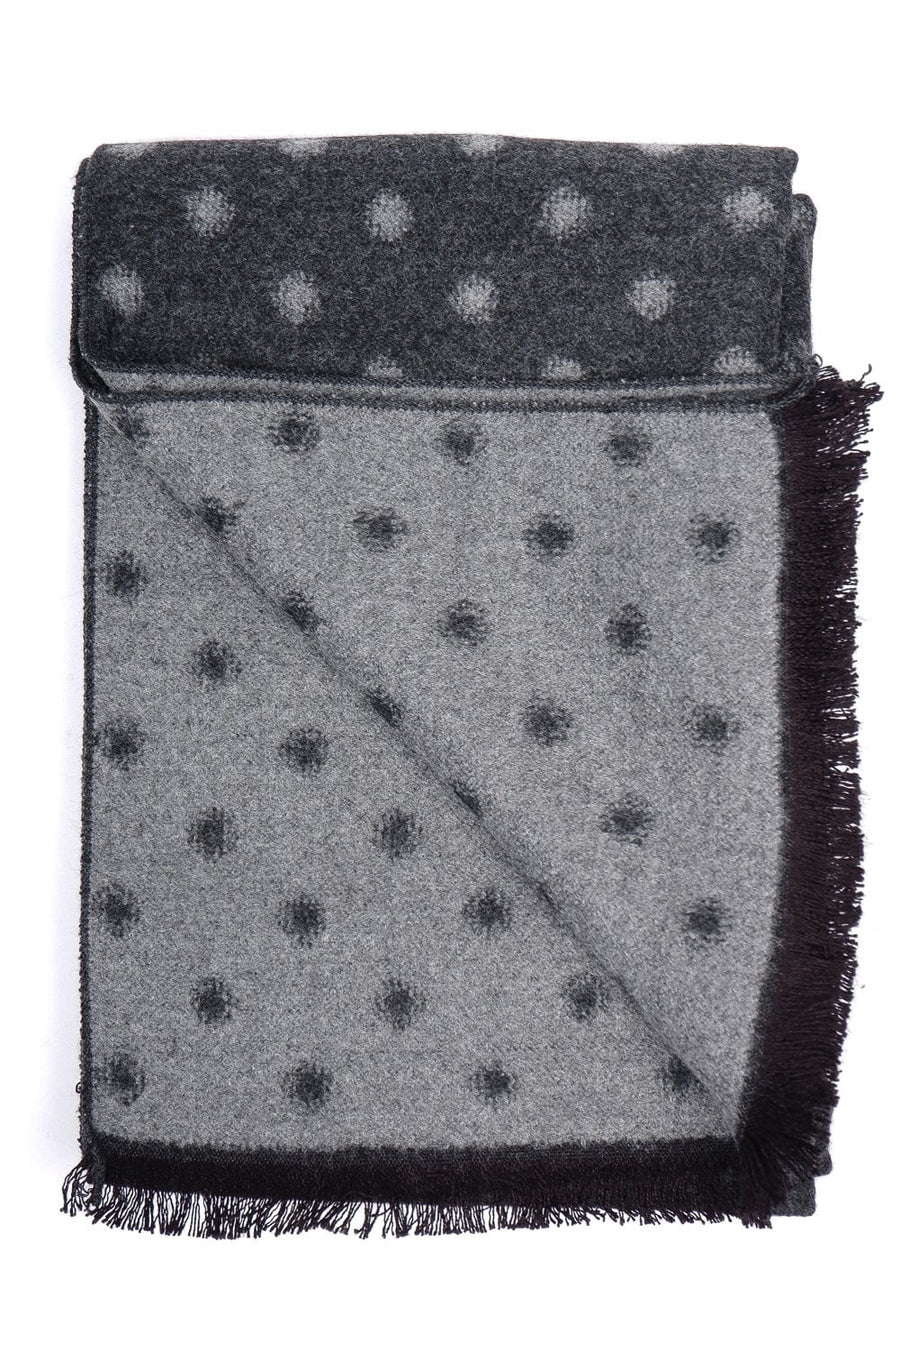 Buy the Remus Uomo Spotted Scarf in Charcoal at Intro. Spend £50 for free UK delivery. Official stockists. We ship worldwide.